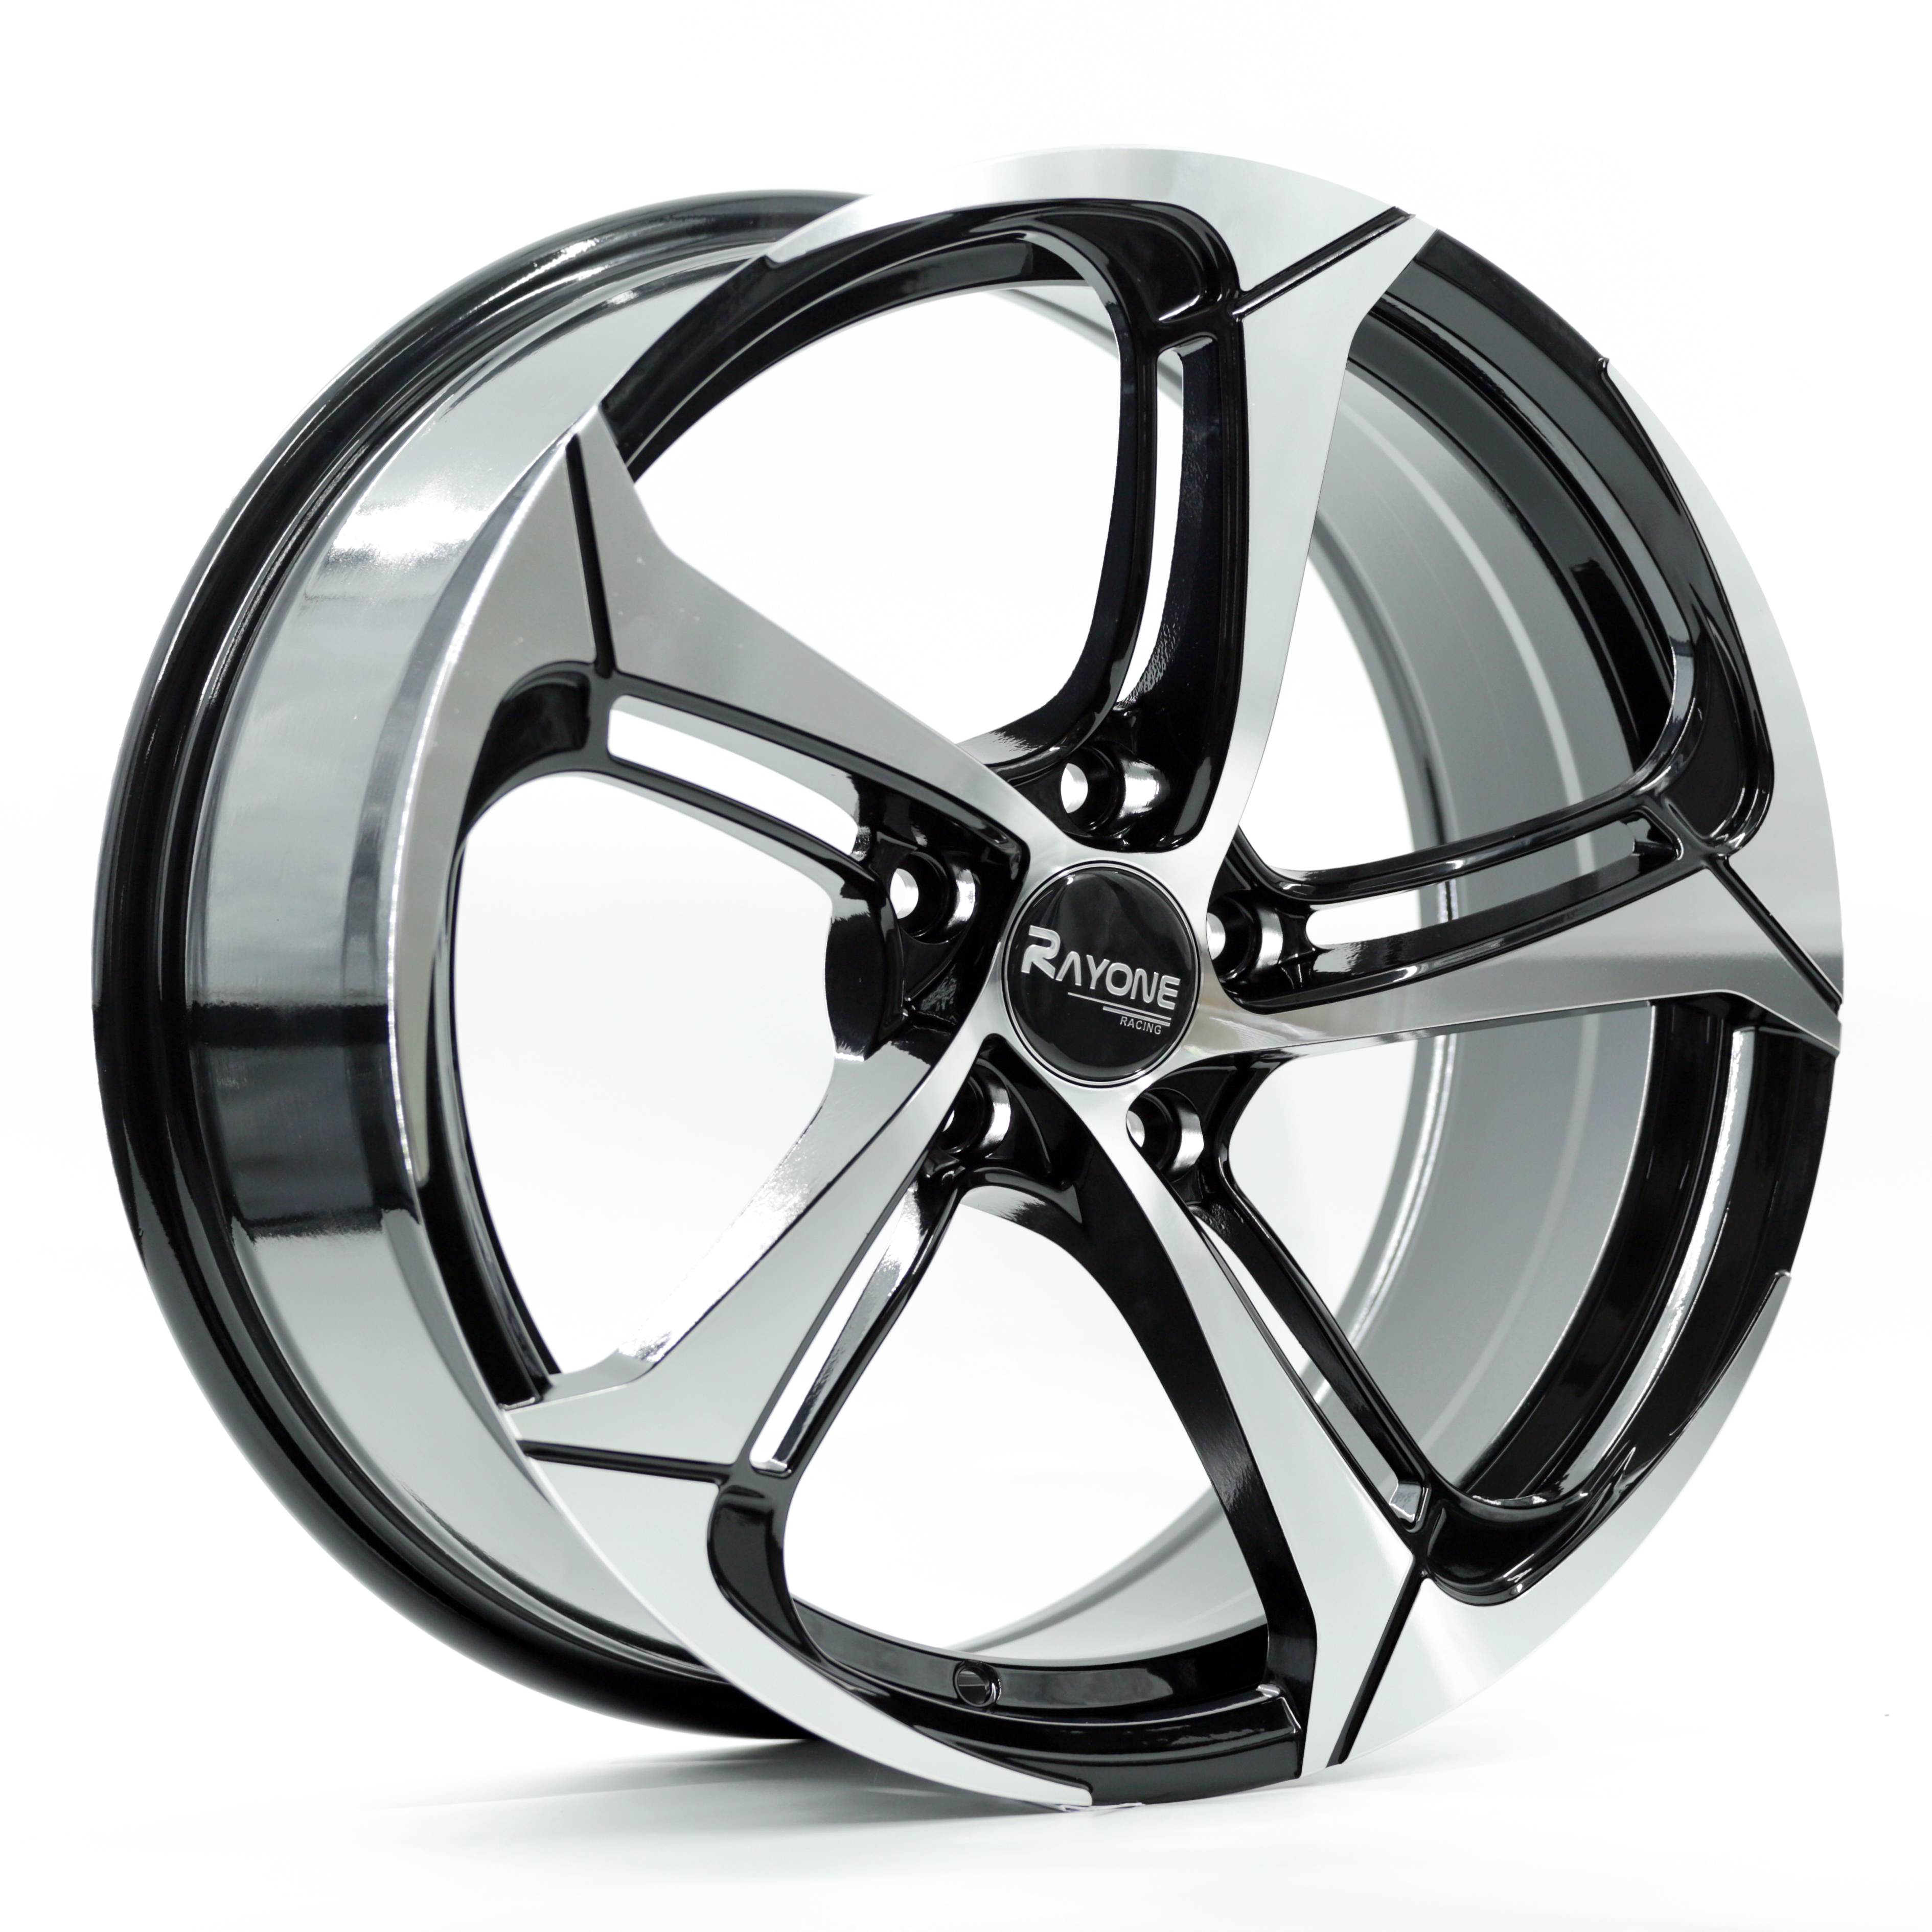 Rayone Factory 18inch Gravity Casting Car Alloy Wheels Wholesale